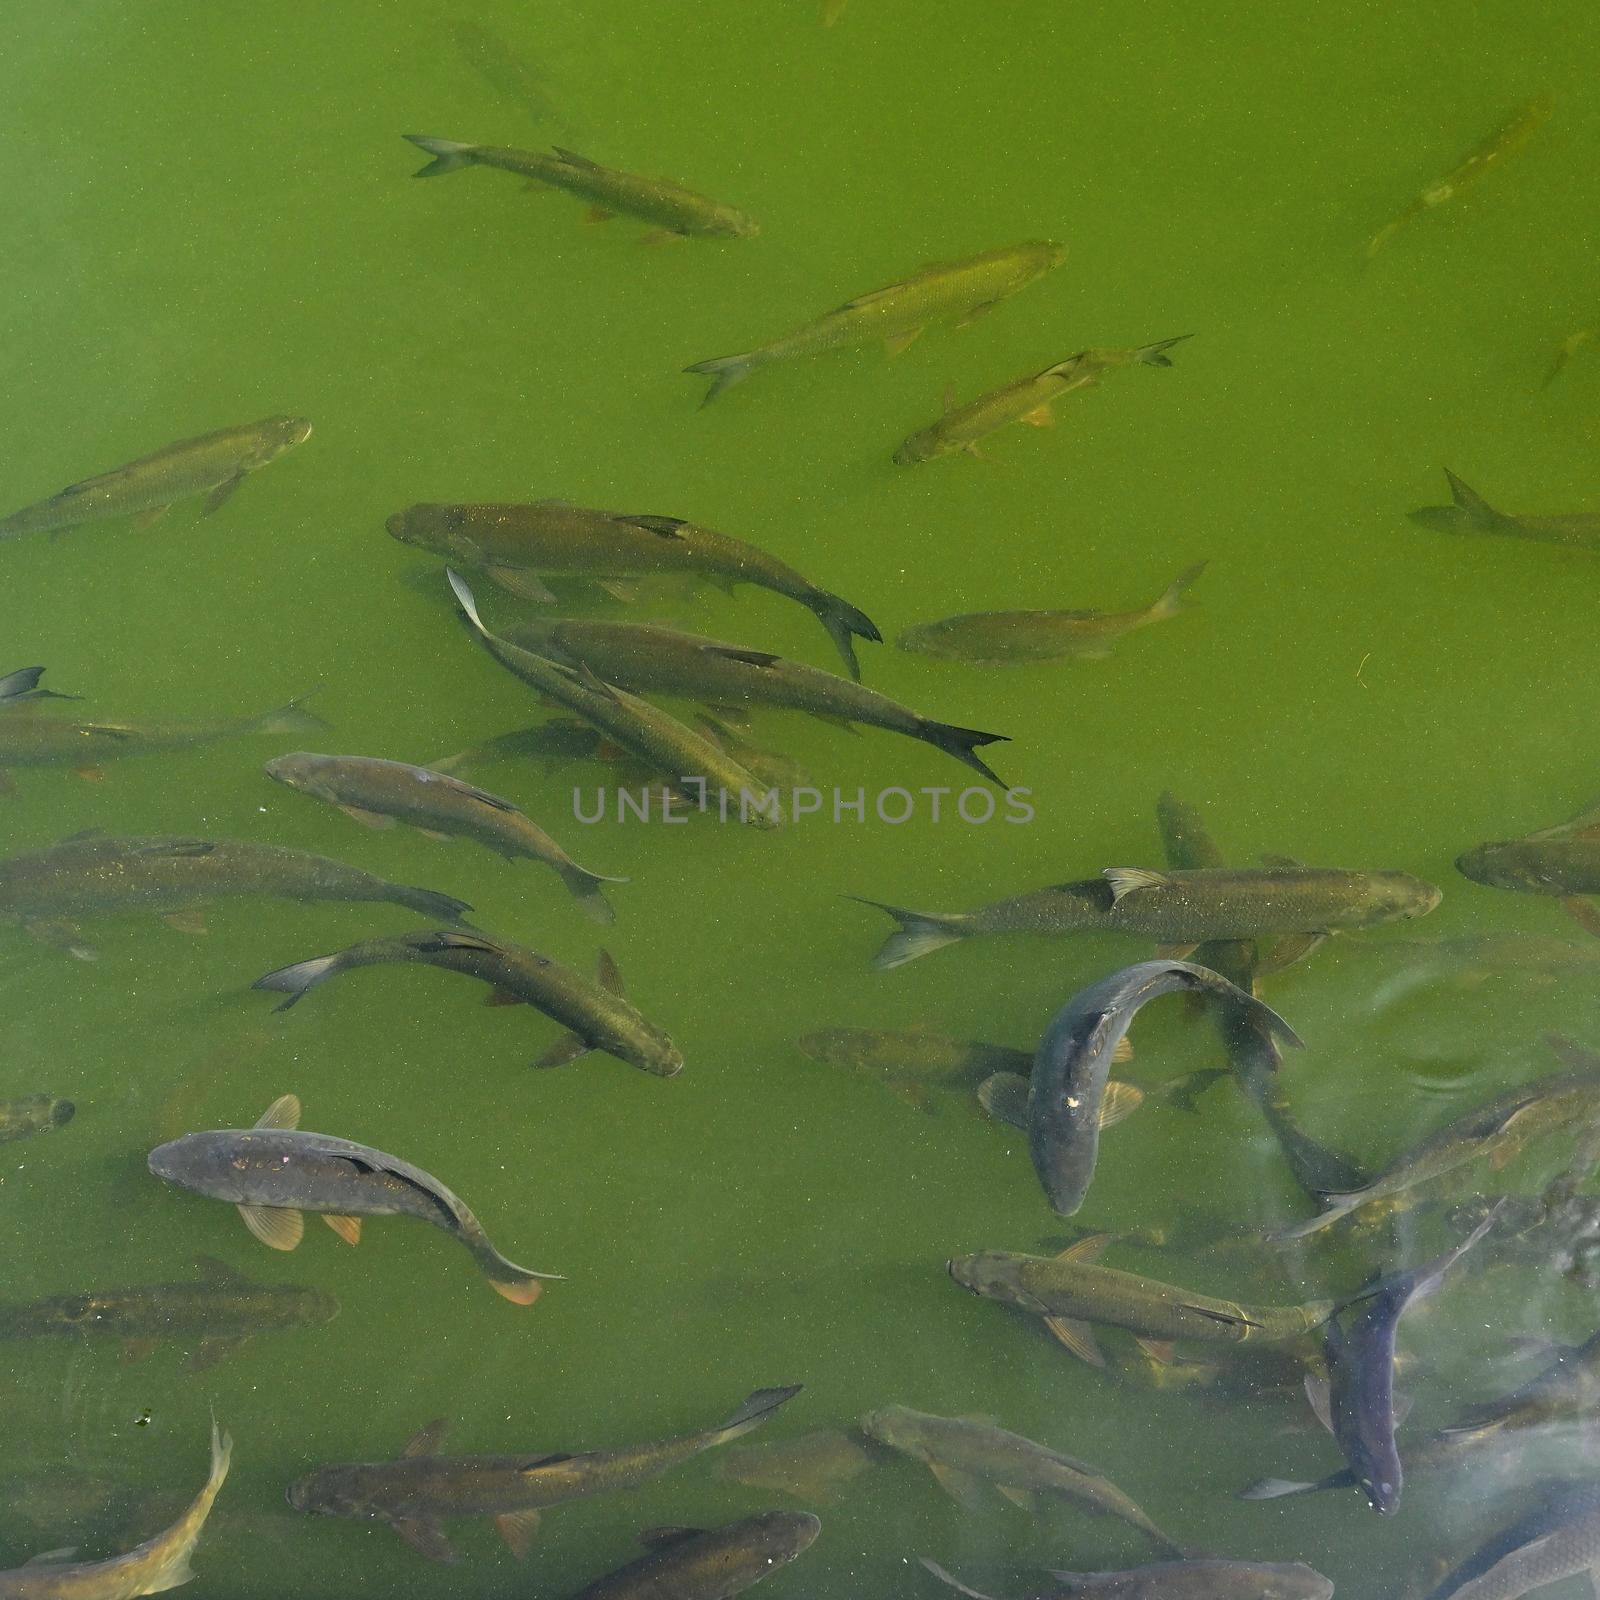 Fish in water. Common carp (Cyprinus carpio) Concept for sport fishing and animals in nature. by Montypeter